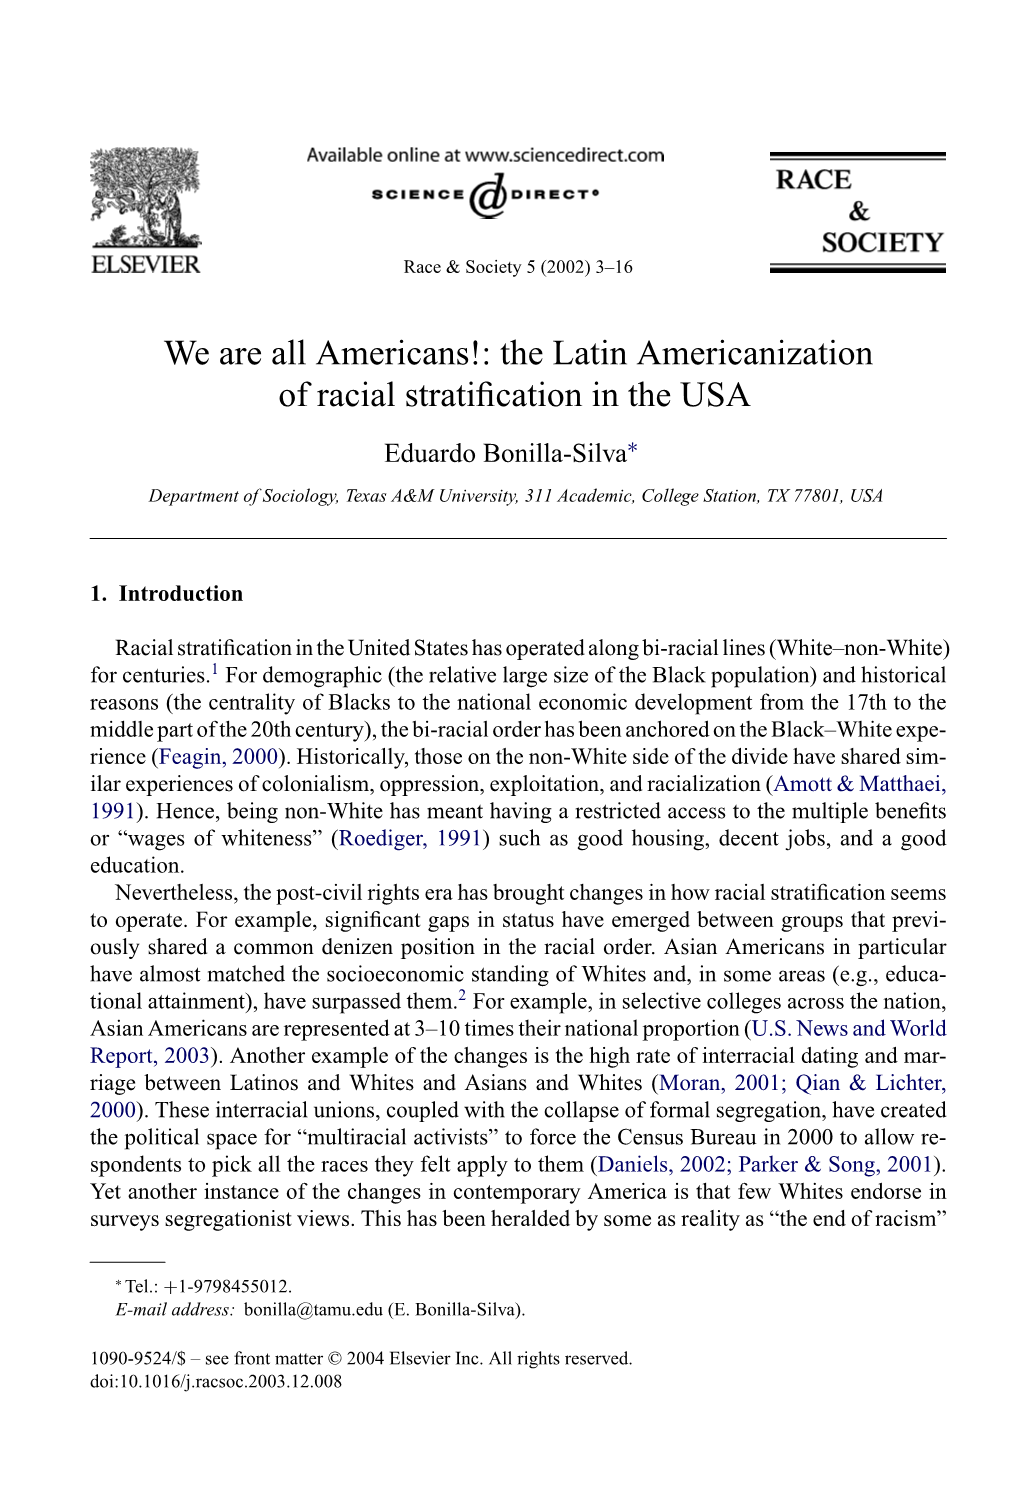 The Latin Americanization of Racial Stratification in The